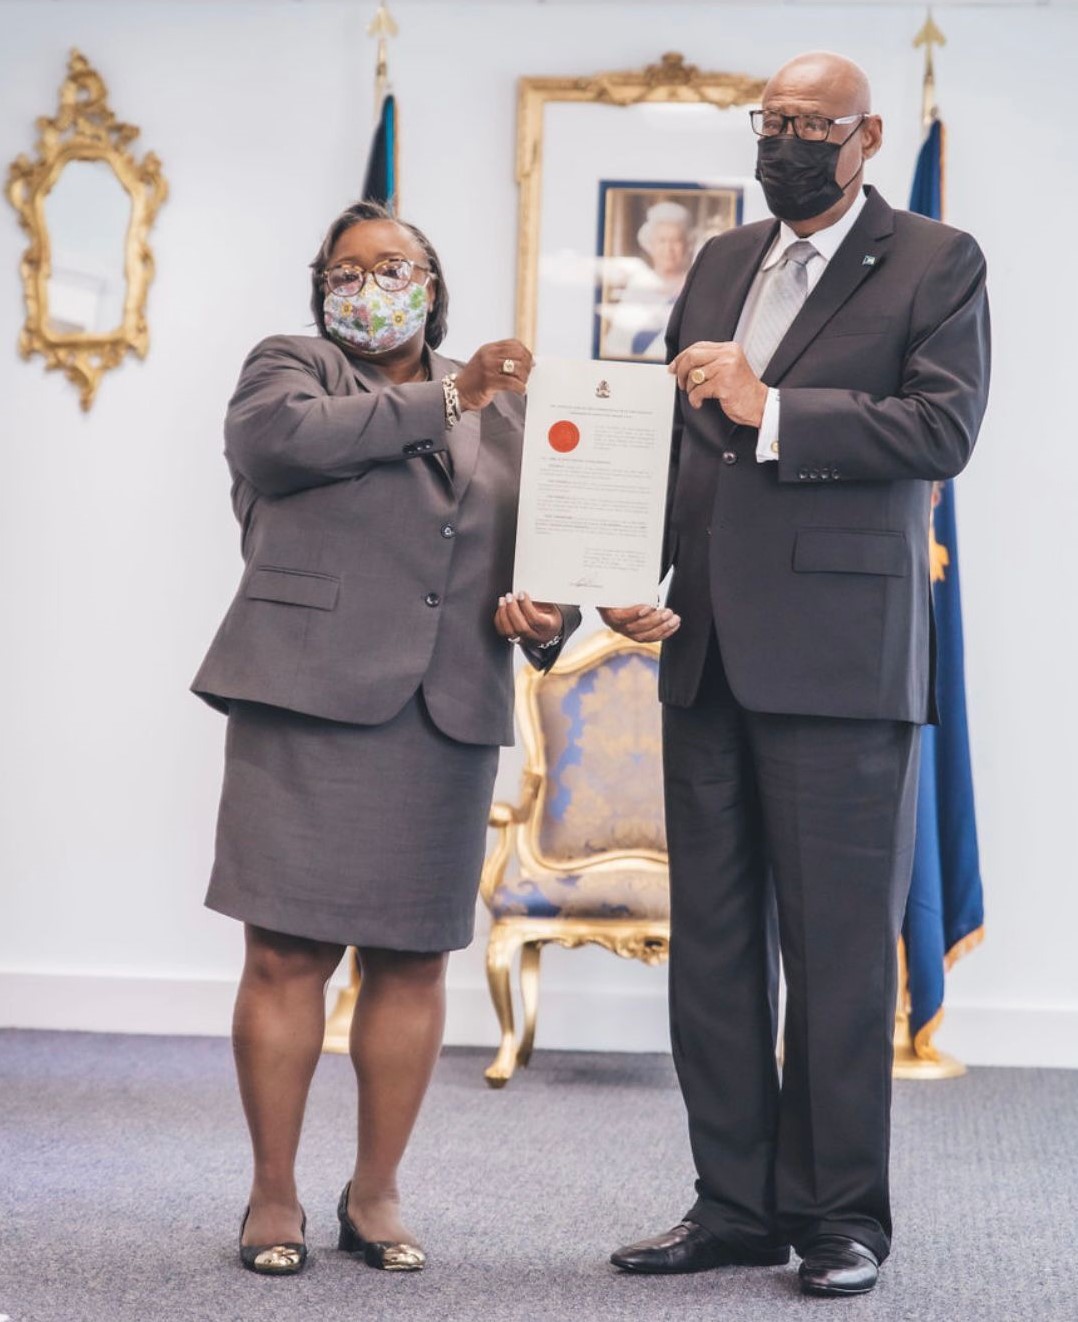 Madam Justice Juanita Denise Lewis-Johnson photographed with His Excellency Sir Cornelius A. Smith, GCMG Governor General of The Bahamas.